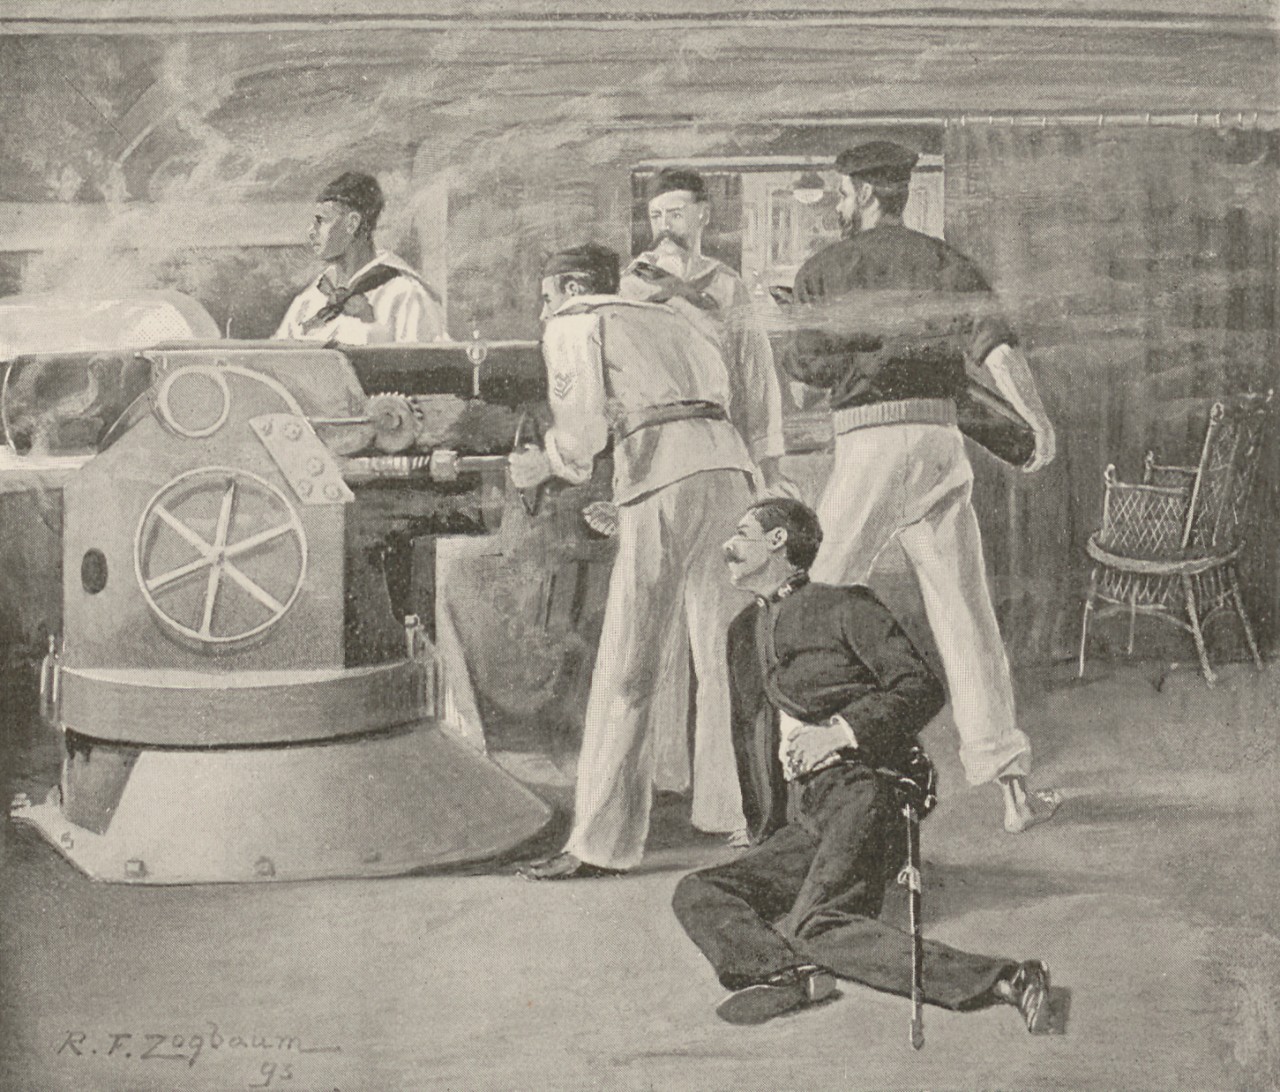 Rufus F. Zogbaum's artistic rendition of manning the guns during a battle.